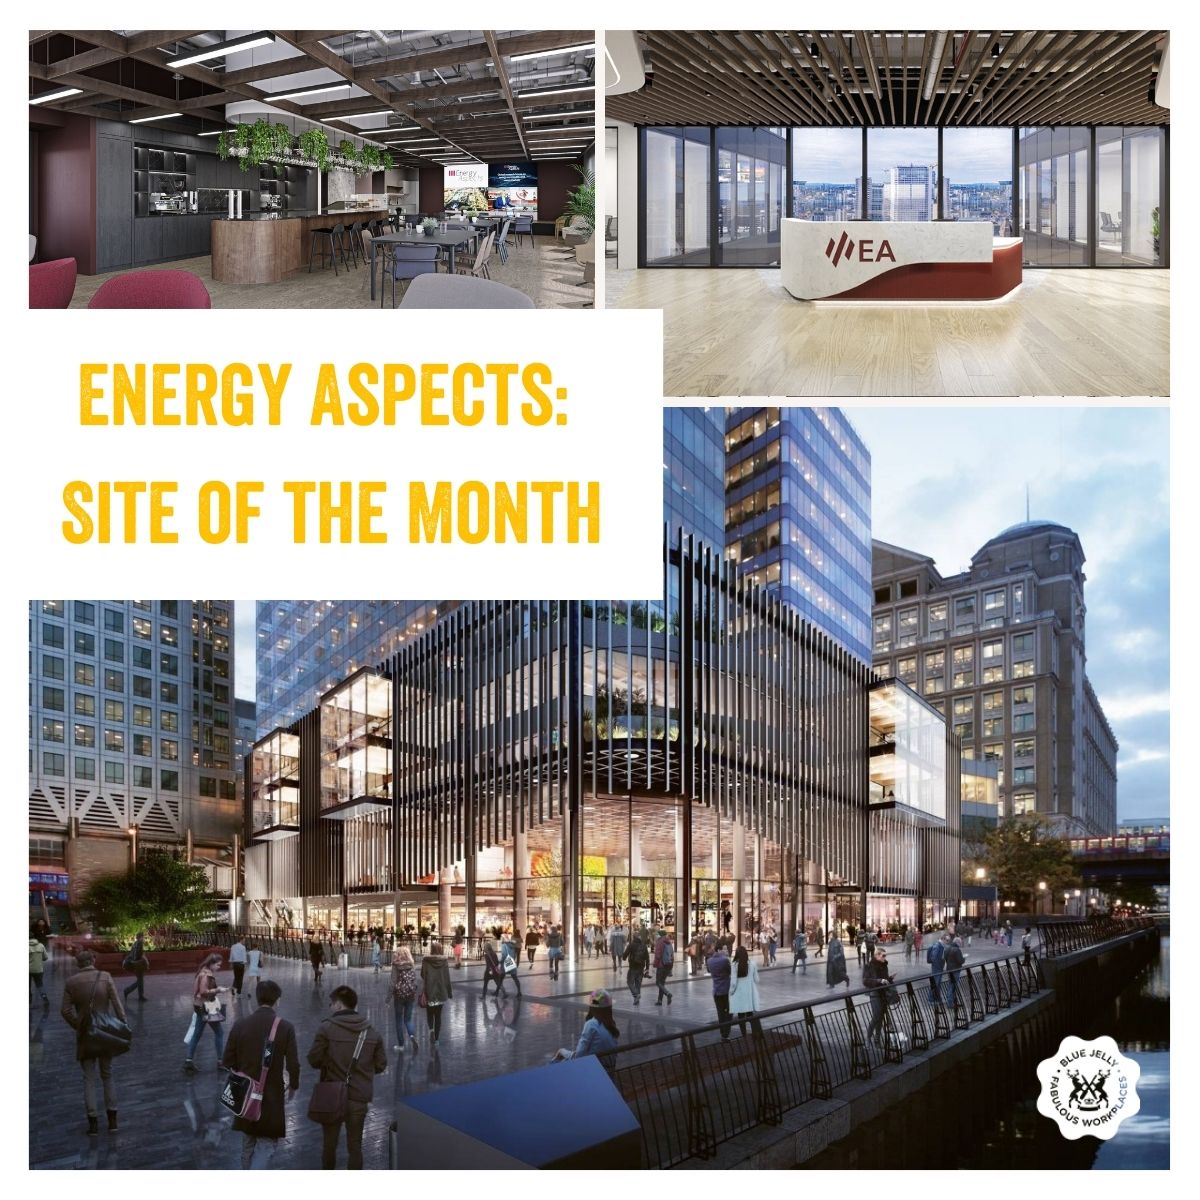 SITE OF THE MONTH – Energy Aspect, Canary Wharf

We are halfway through our 16-week build @cargolondon for @EnergyAspects. Our Site Manager said 'We are seeing the design come to life, and I can't wait for the client to see the finished result'.

#BlueJelly #SiteOfTheMonth